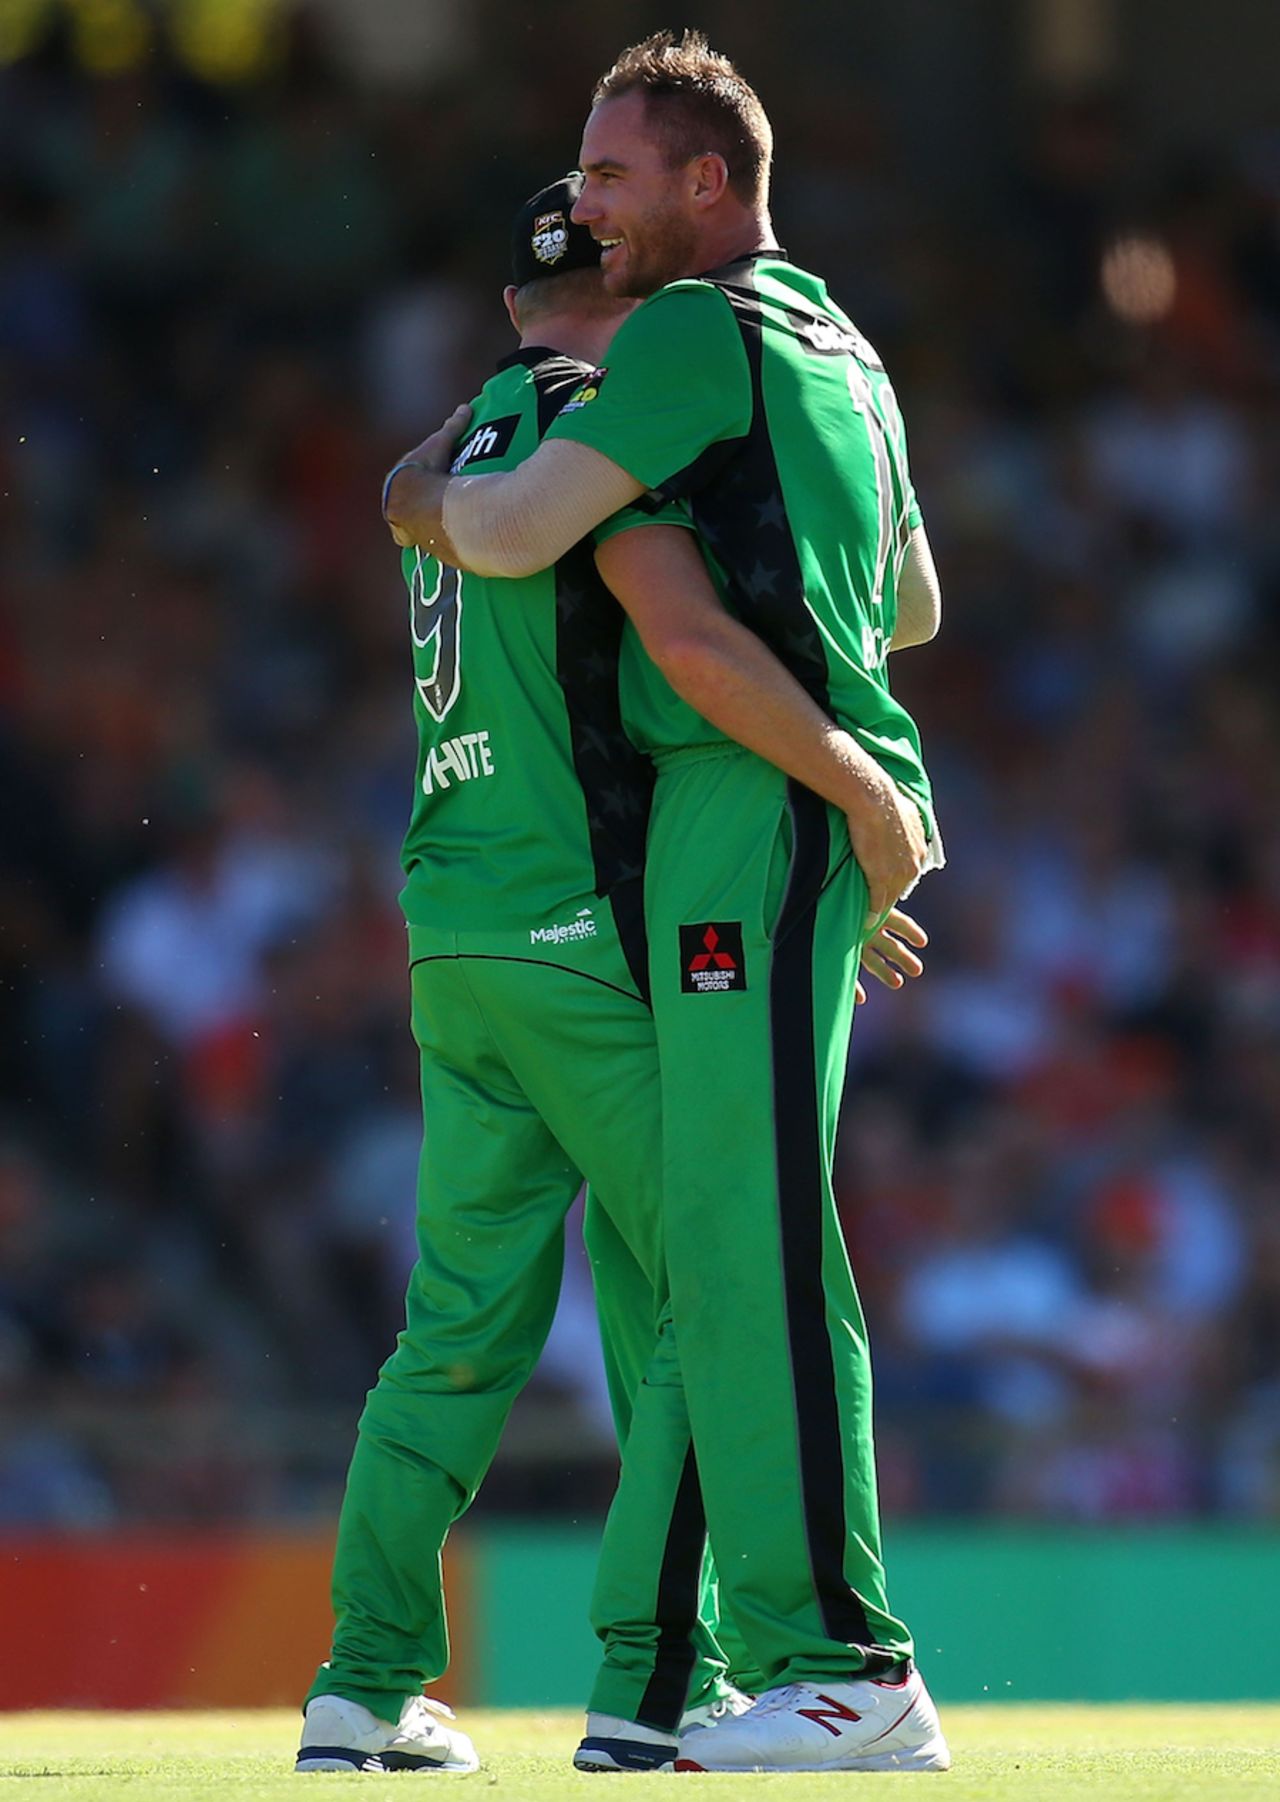 John Hastings picked up three wickets in four overs, Perth Scorchers v Melbourne Stars, Big Bash League 2014-15, semi-final, Perth, January 25, 2015